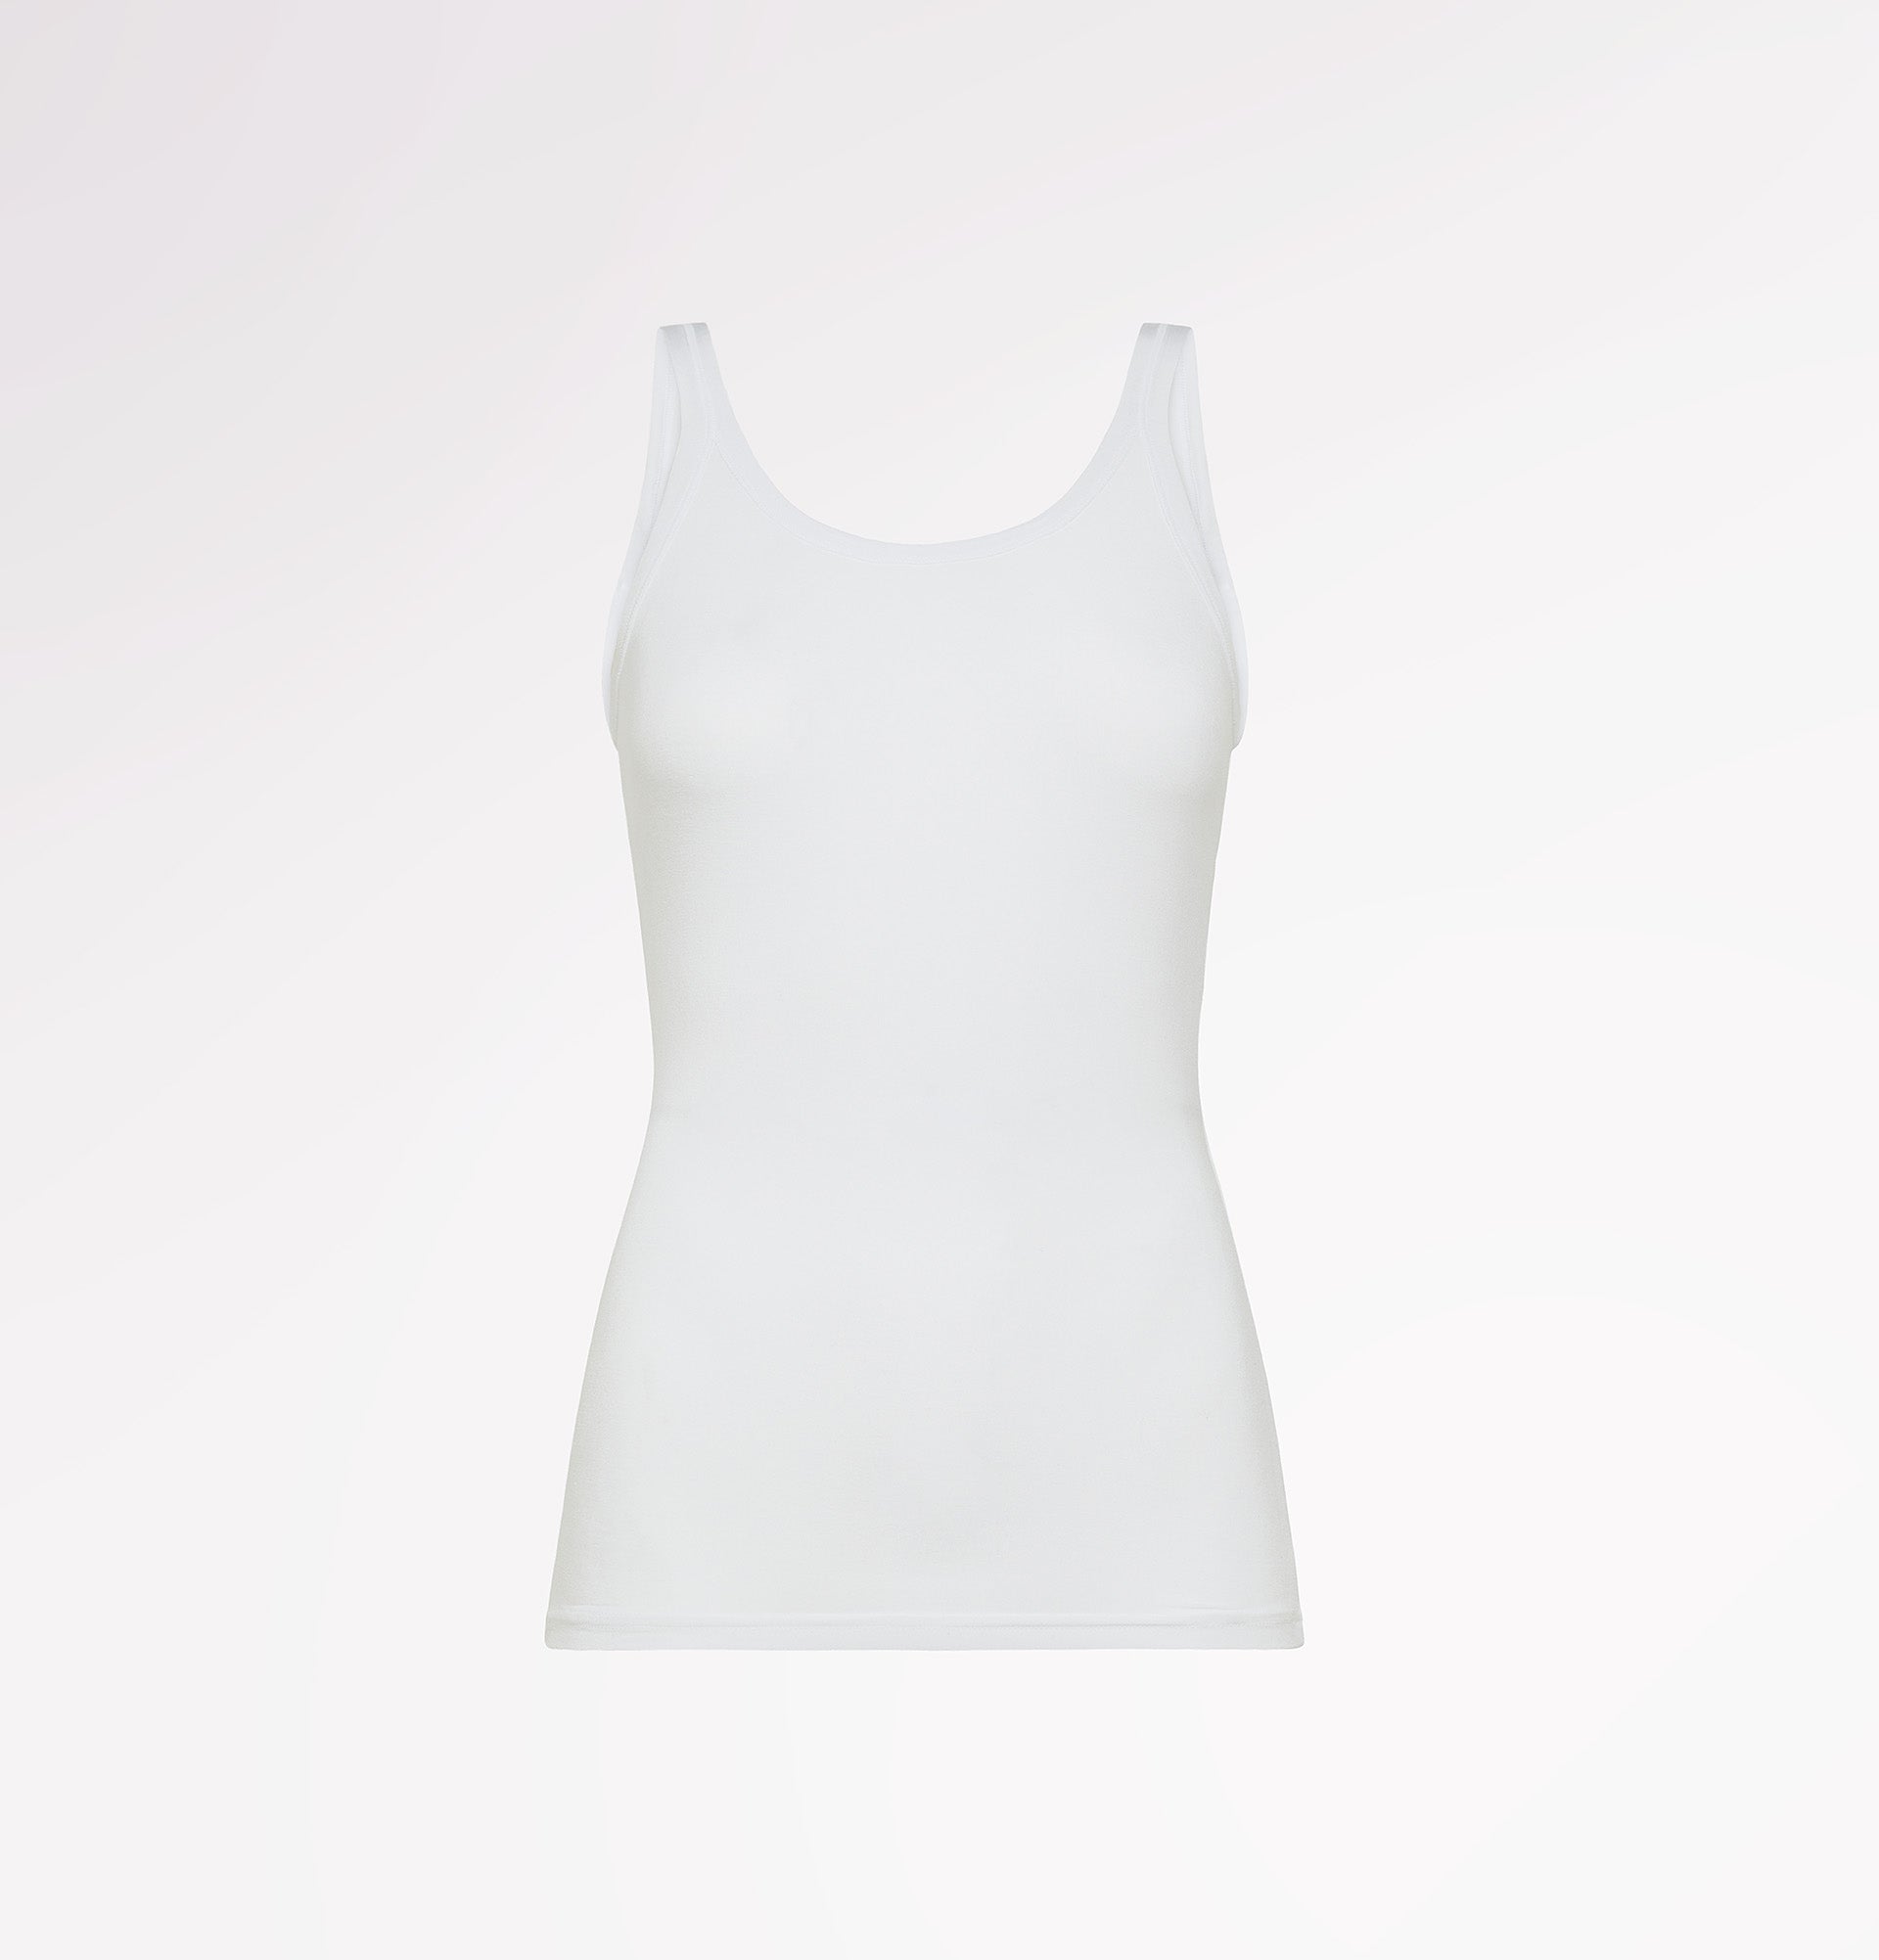 Classic tank top in natural fabric